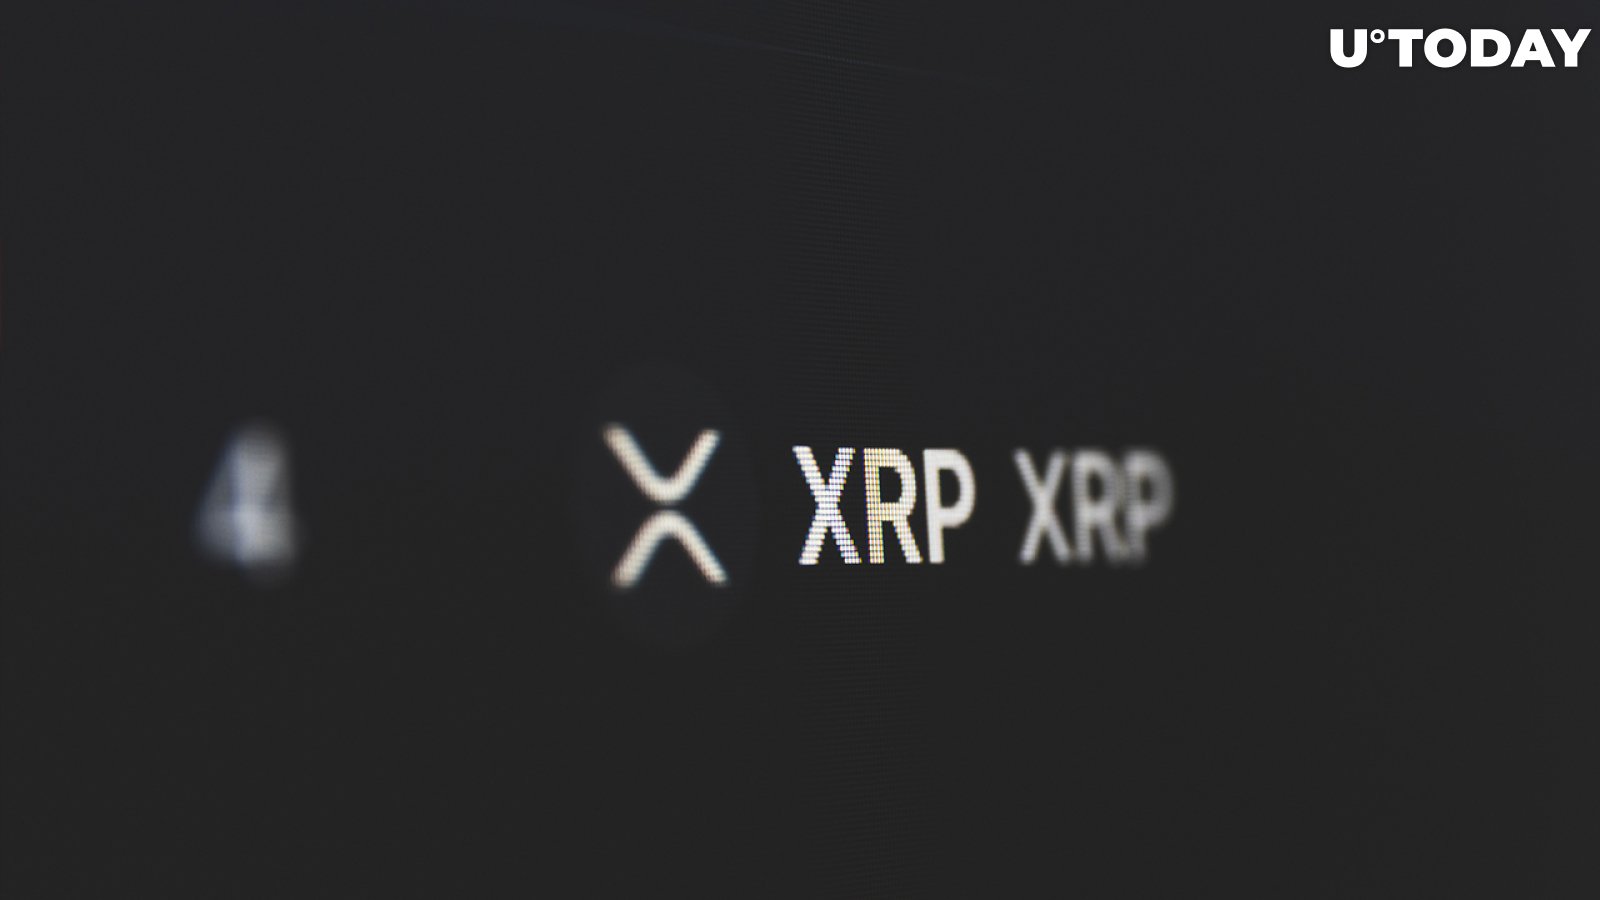 53.5 Million XRP Shifted by Ripple's Large ODL Corridor